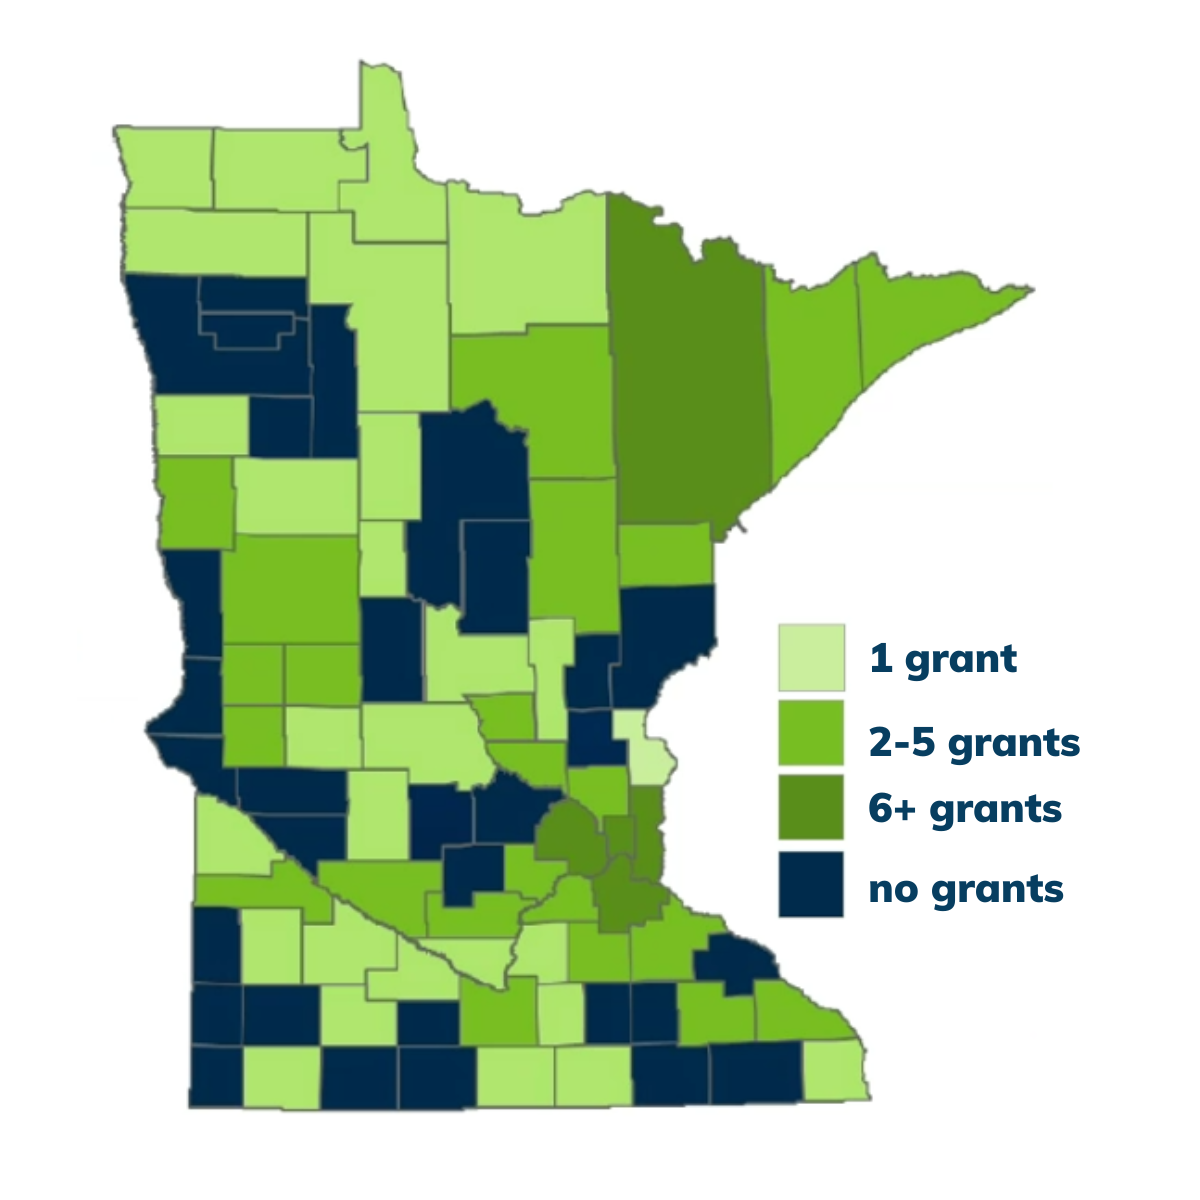 A map of Minnesota's counties showing the number of grants per county, ranging from no grants to 6+ grants